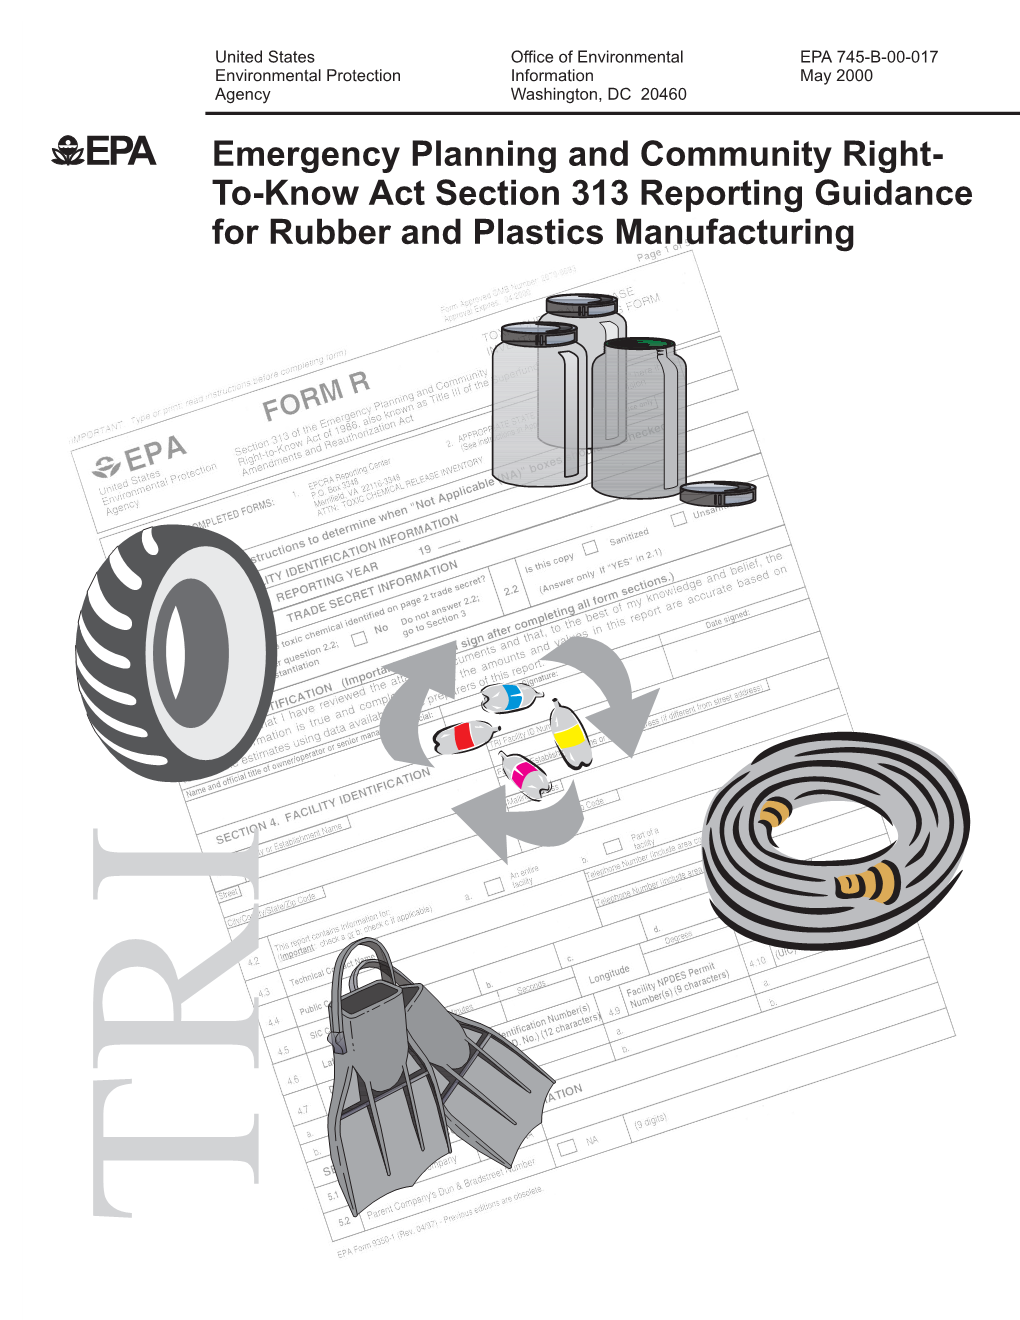 EPA Emergency Planning and Community Right- To-Know Act Section 313 Reporting Guidance for Rubber and Plastics Manufacturing